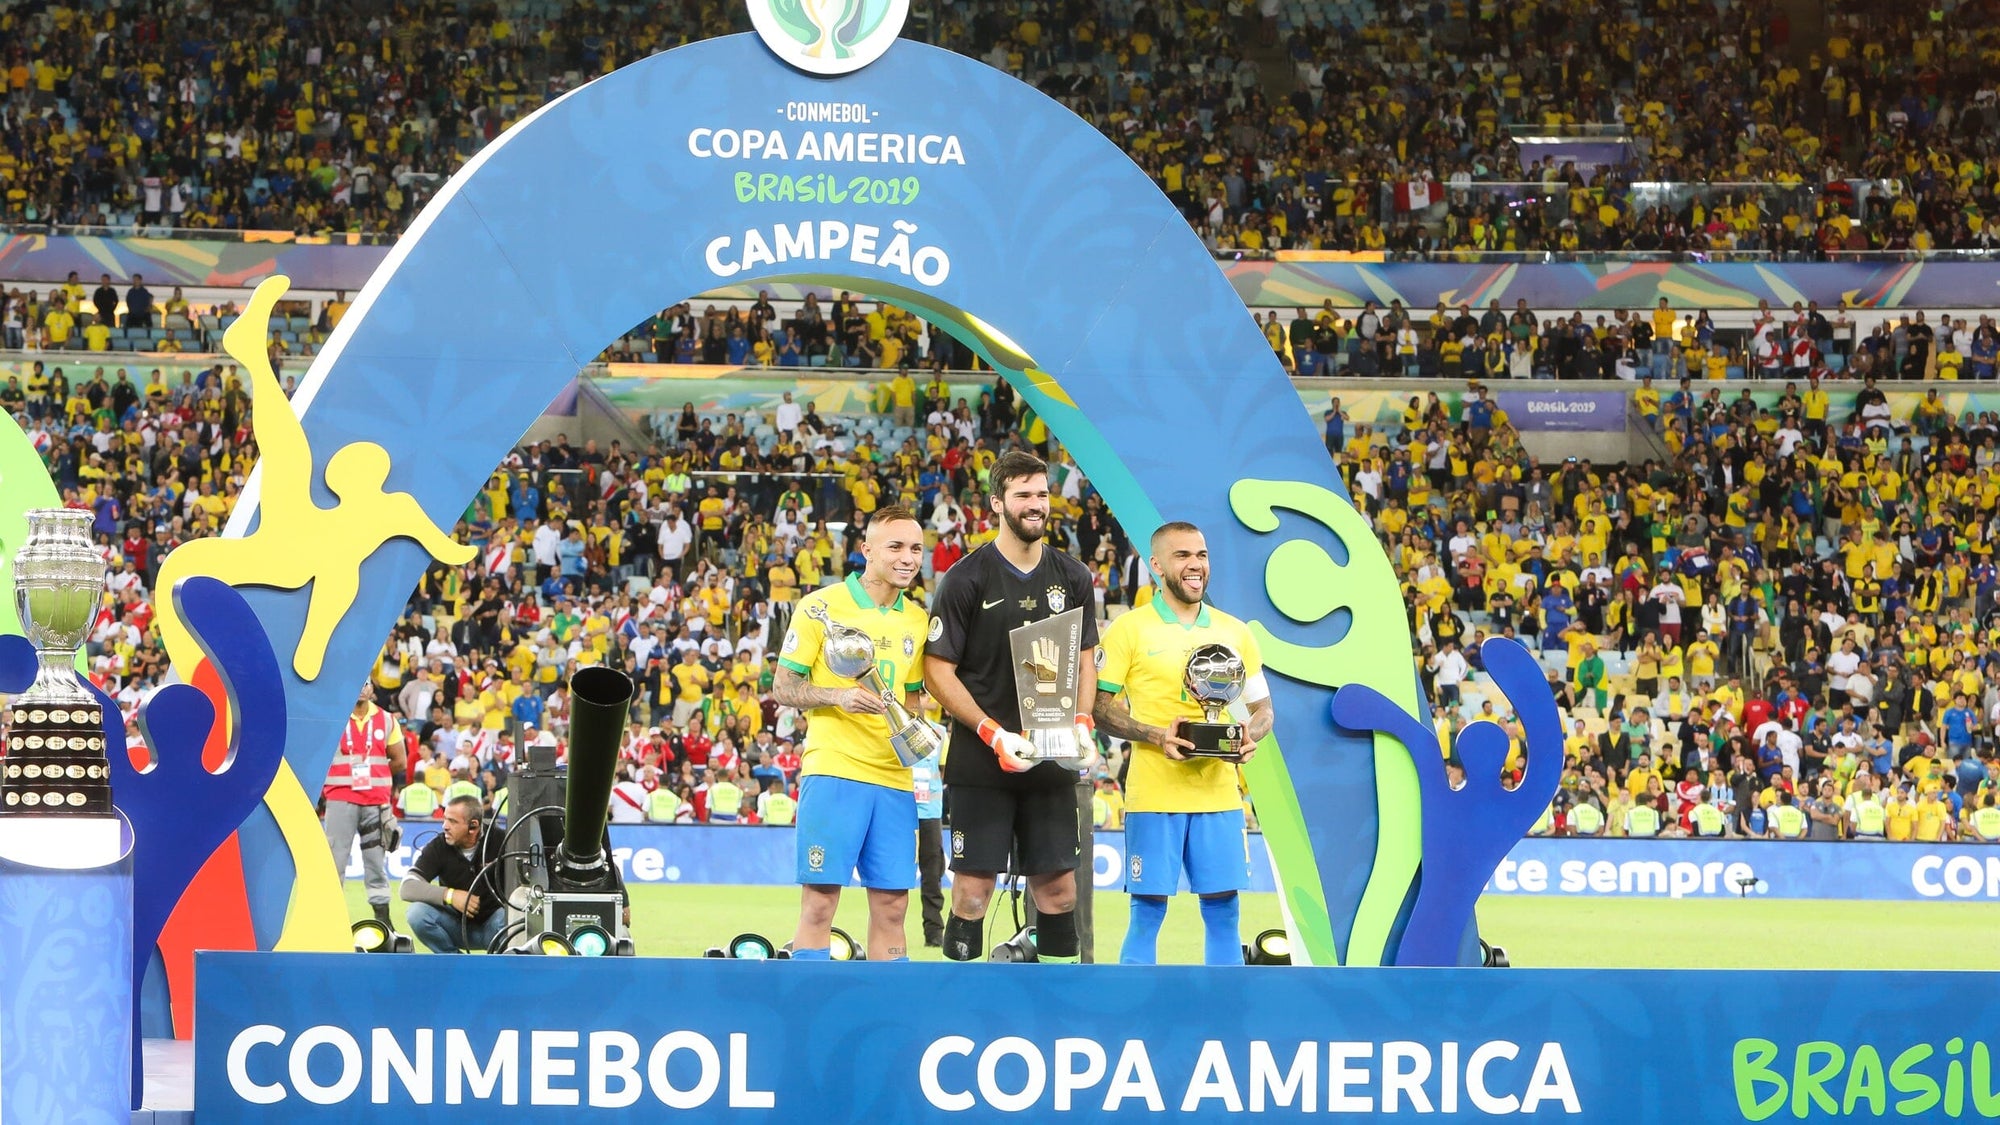 Copa America Winners: A Glorious History of South American soccer. Palácio do Planalto, CC BY 2.0 <https://creativecommons.org/licenses/by/2.0>, via Wikimedia Commons